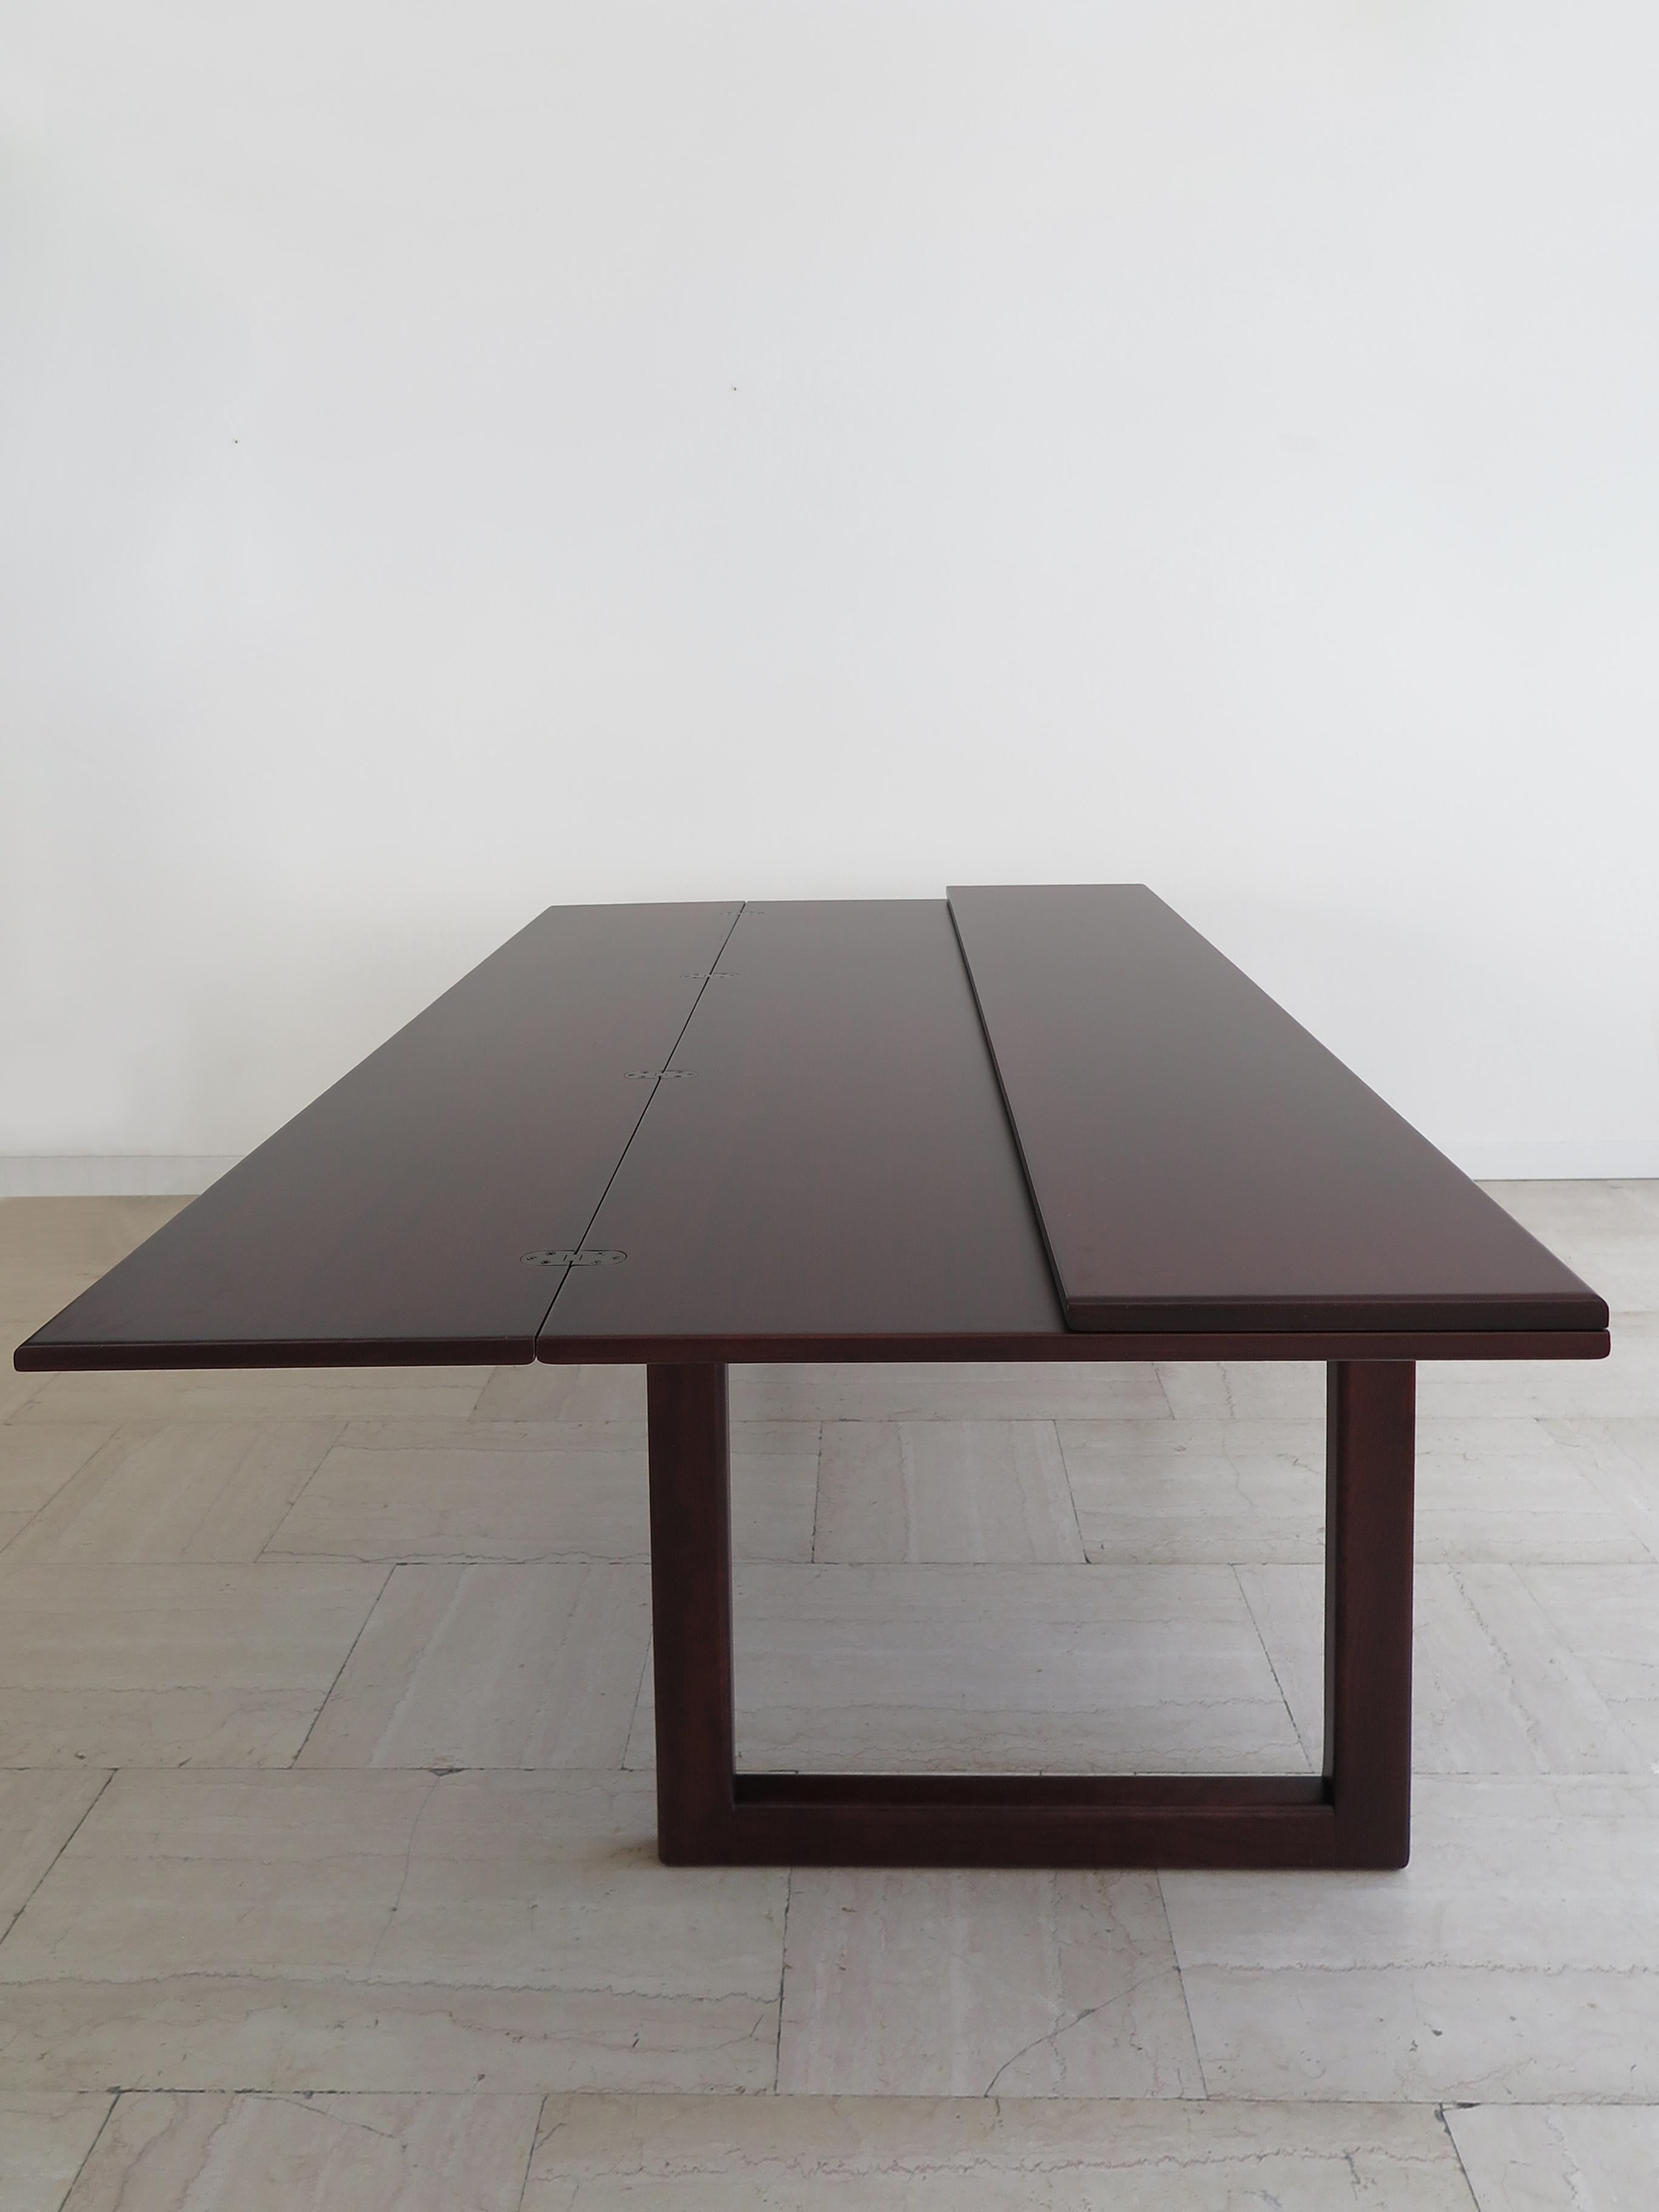 Italian midcentury modern design dining table model SC/66 with extendable rectangular top that can be opened, the table was designed by Claudio Salocchi and manufactured by Sormani, dark wood legs and top, metal frame and details, Italy